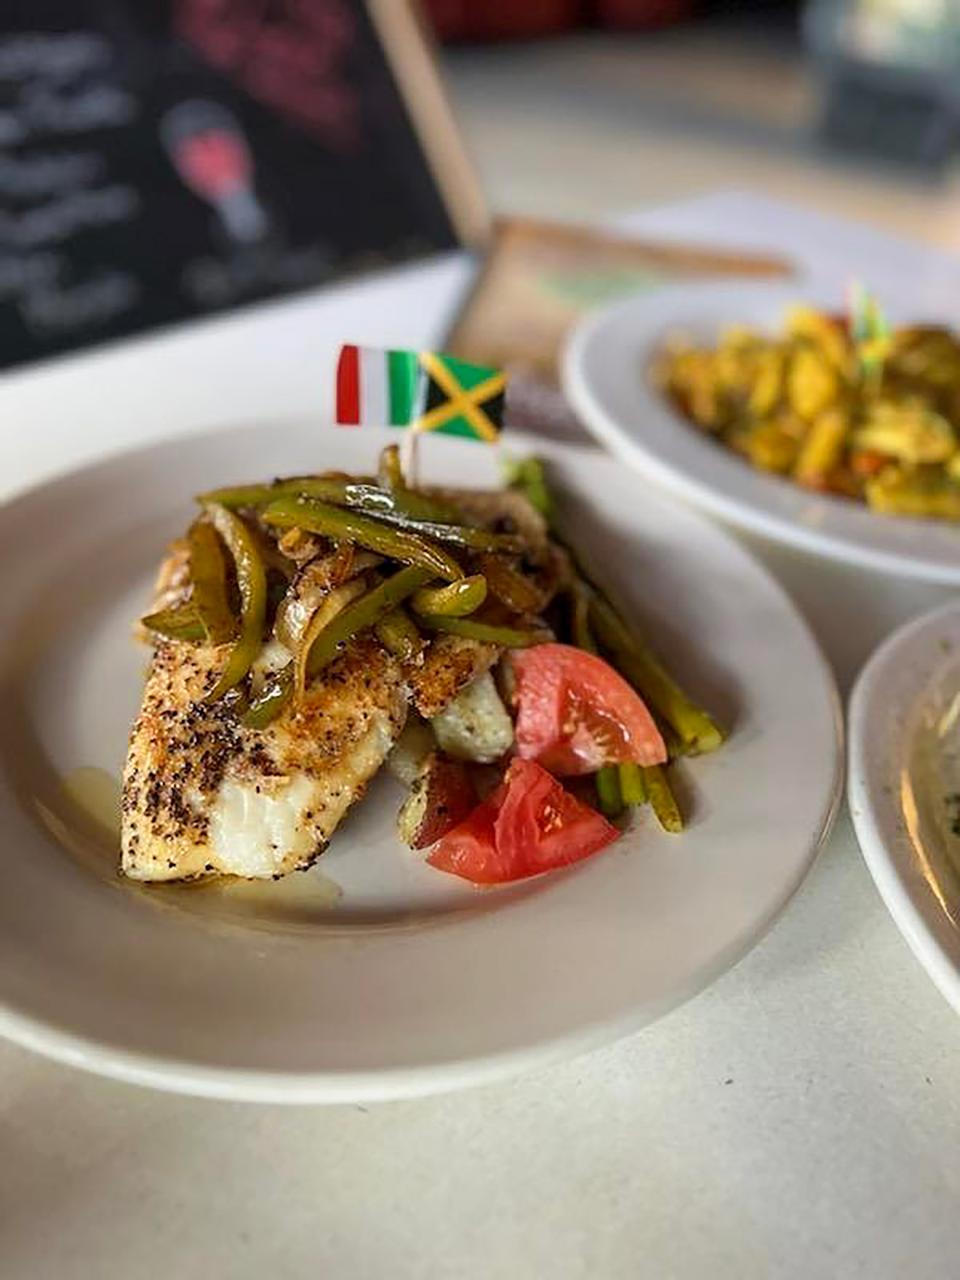 Snapper fish over veggies is one of the Jamaican fusion dishes offer at Naples Italian Restaurant in Leesburg.